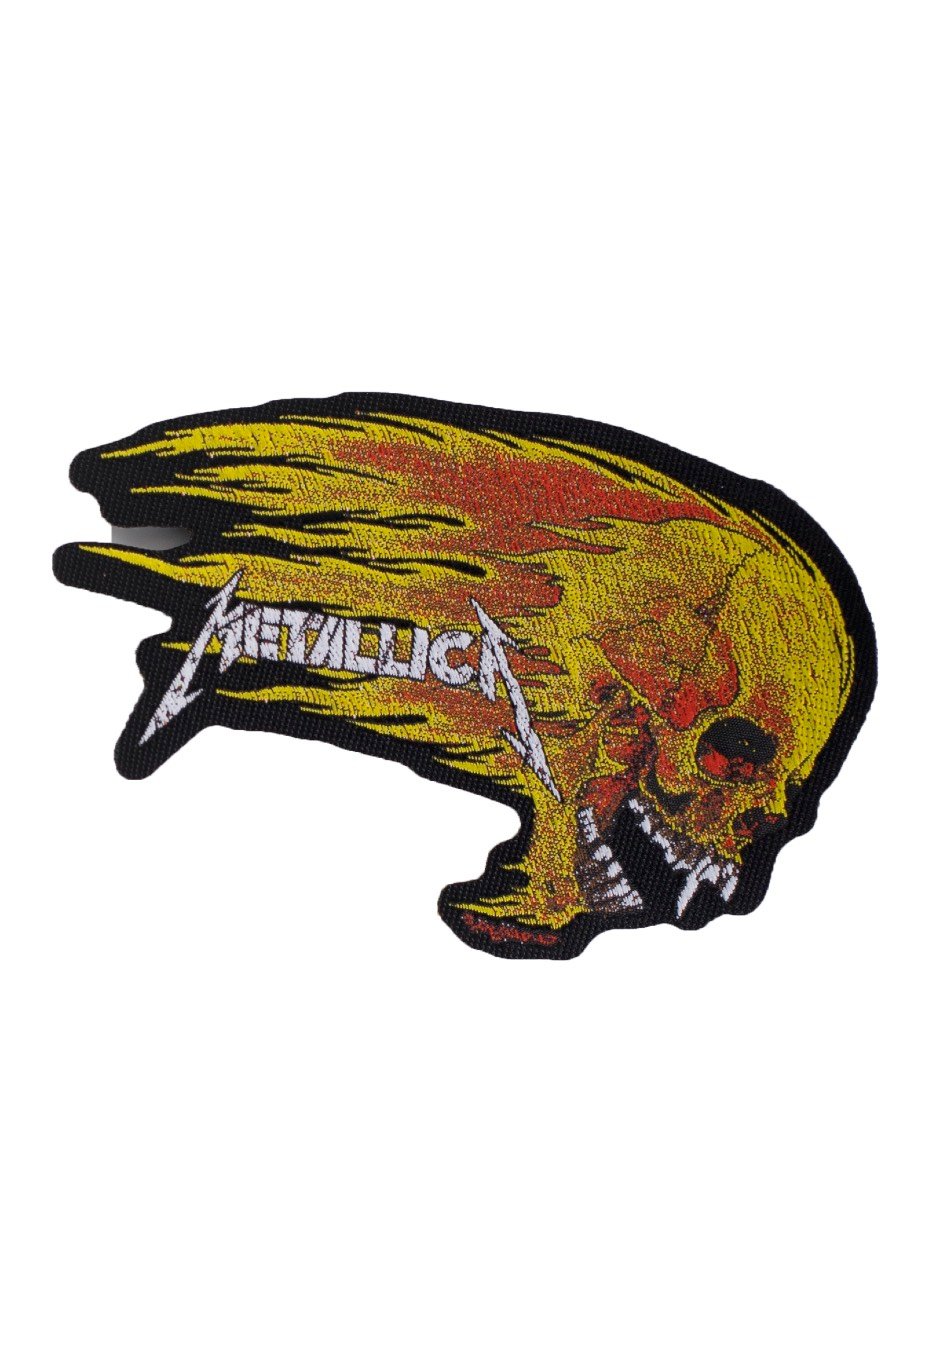 Metallica - Flaming Skull Cut Out - Patch